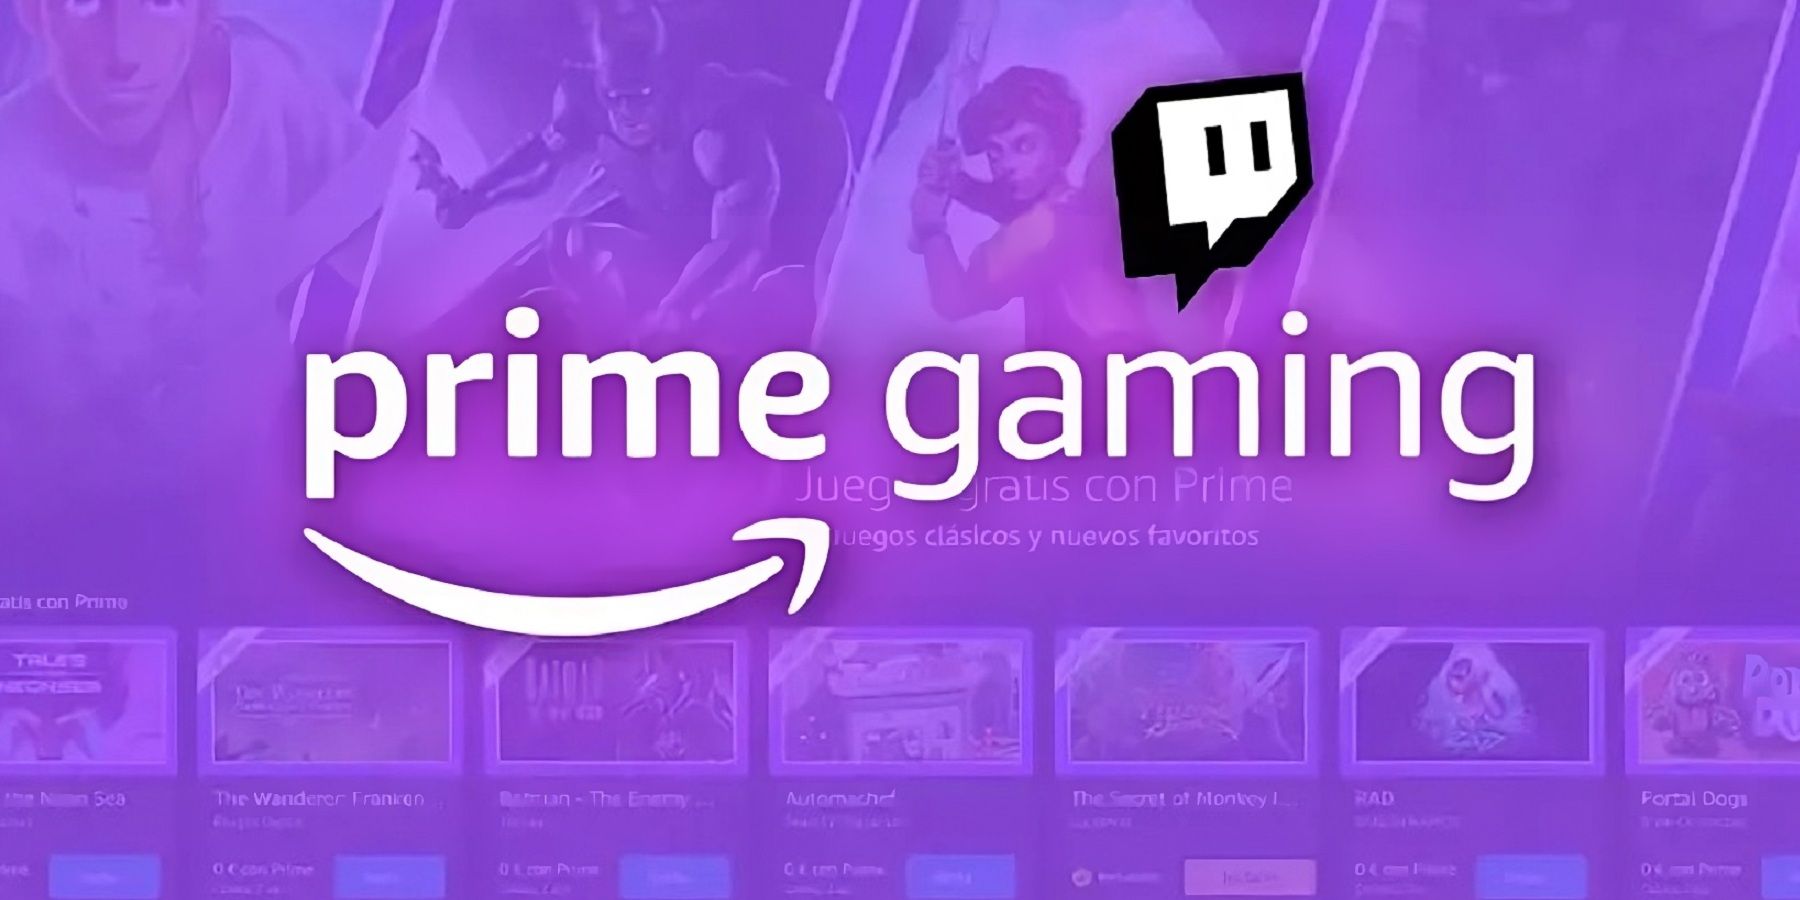 Prime March 2023 offers in India: Free games, exclusive